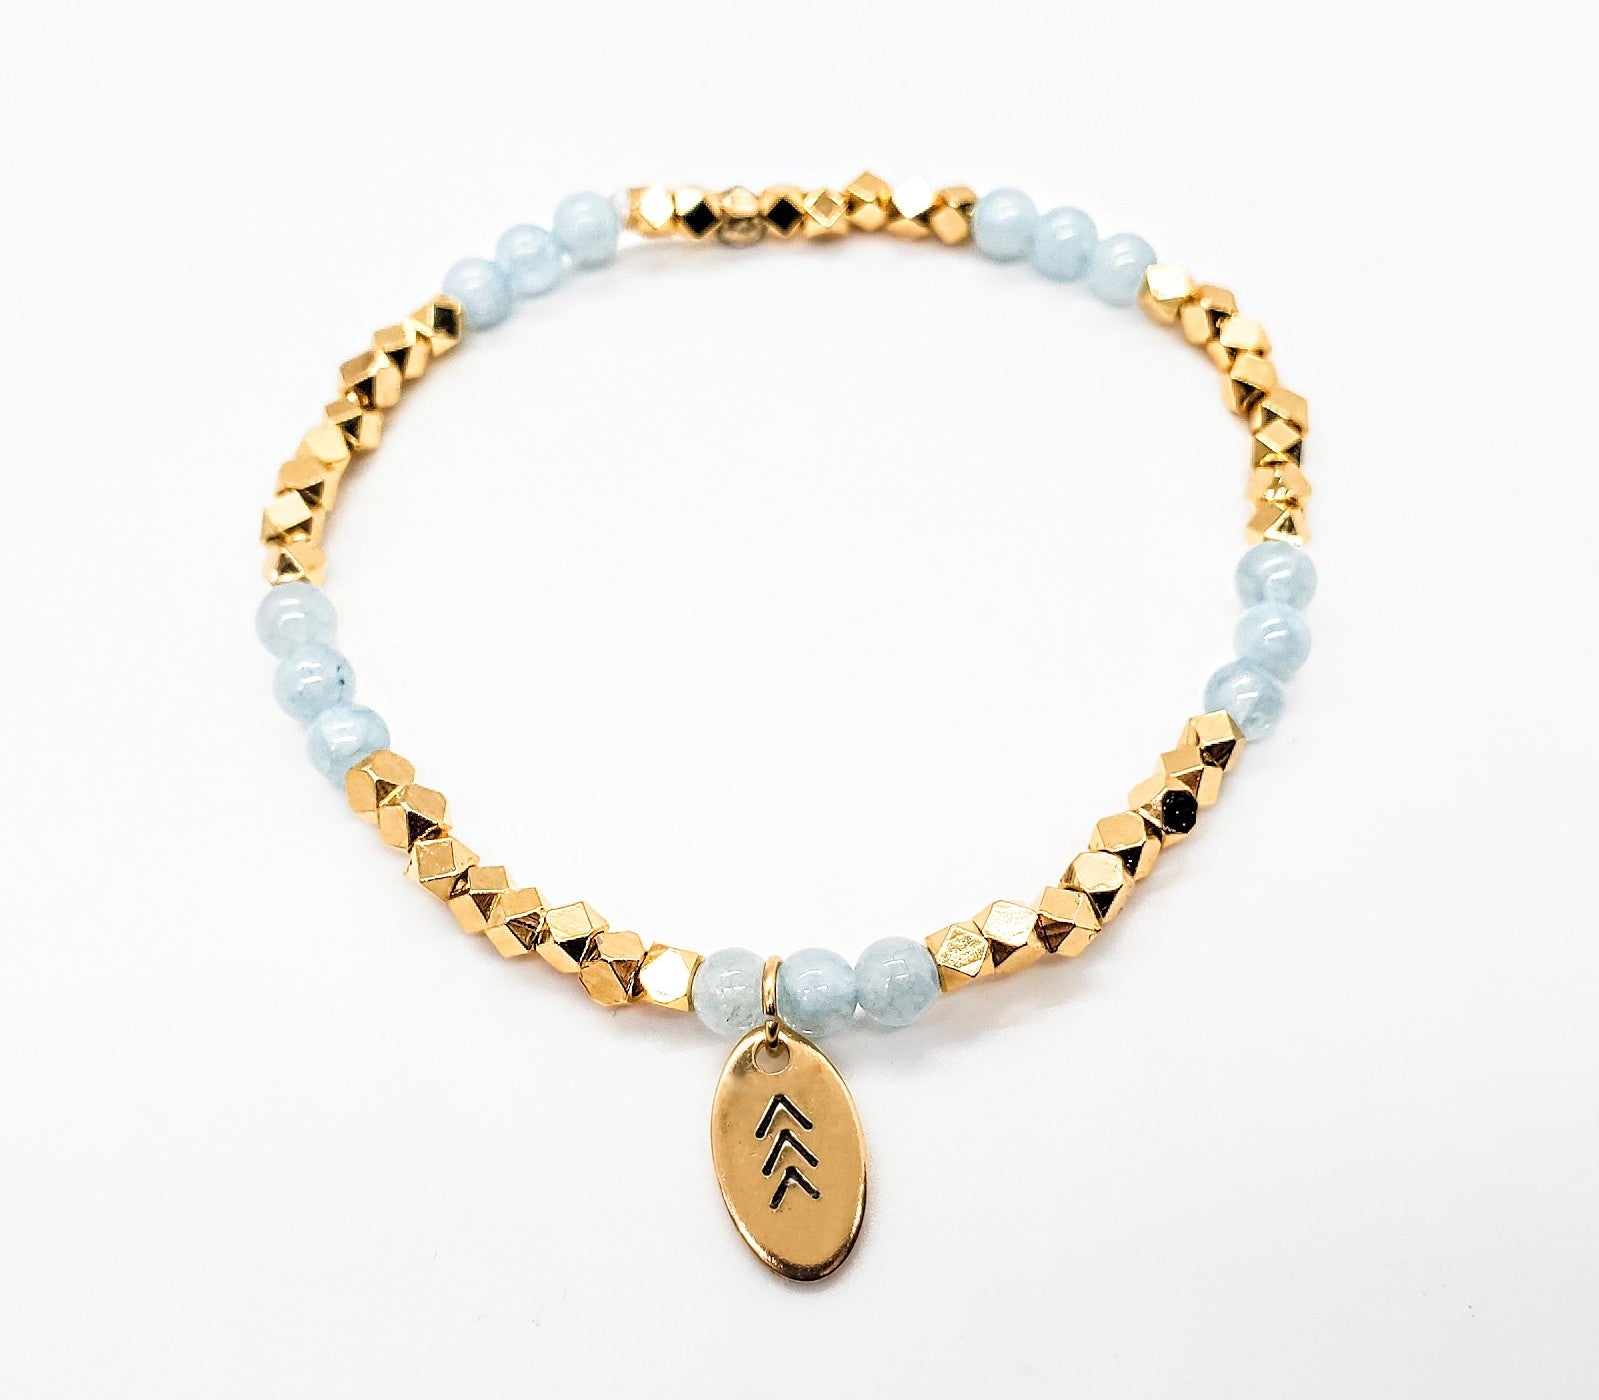 Trendy! Genuine Light Aquamarine Beads and Gold or Silver Nugget Beads with Chevron Charm. Silver Nugget / S (5.5 - 6.5) Inches